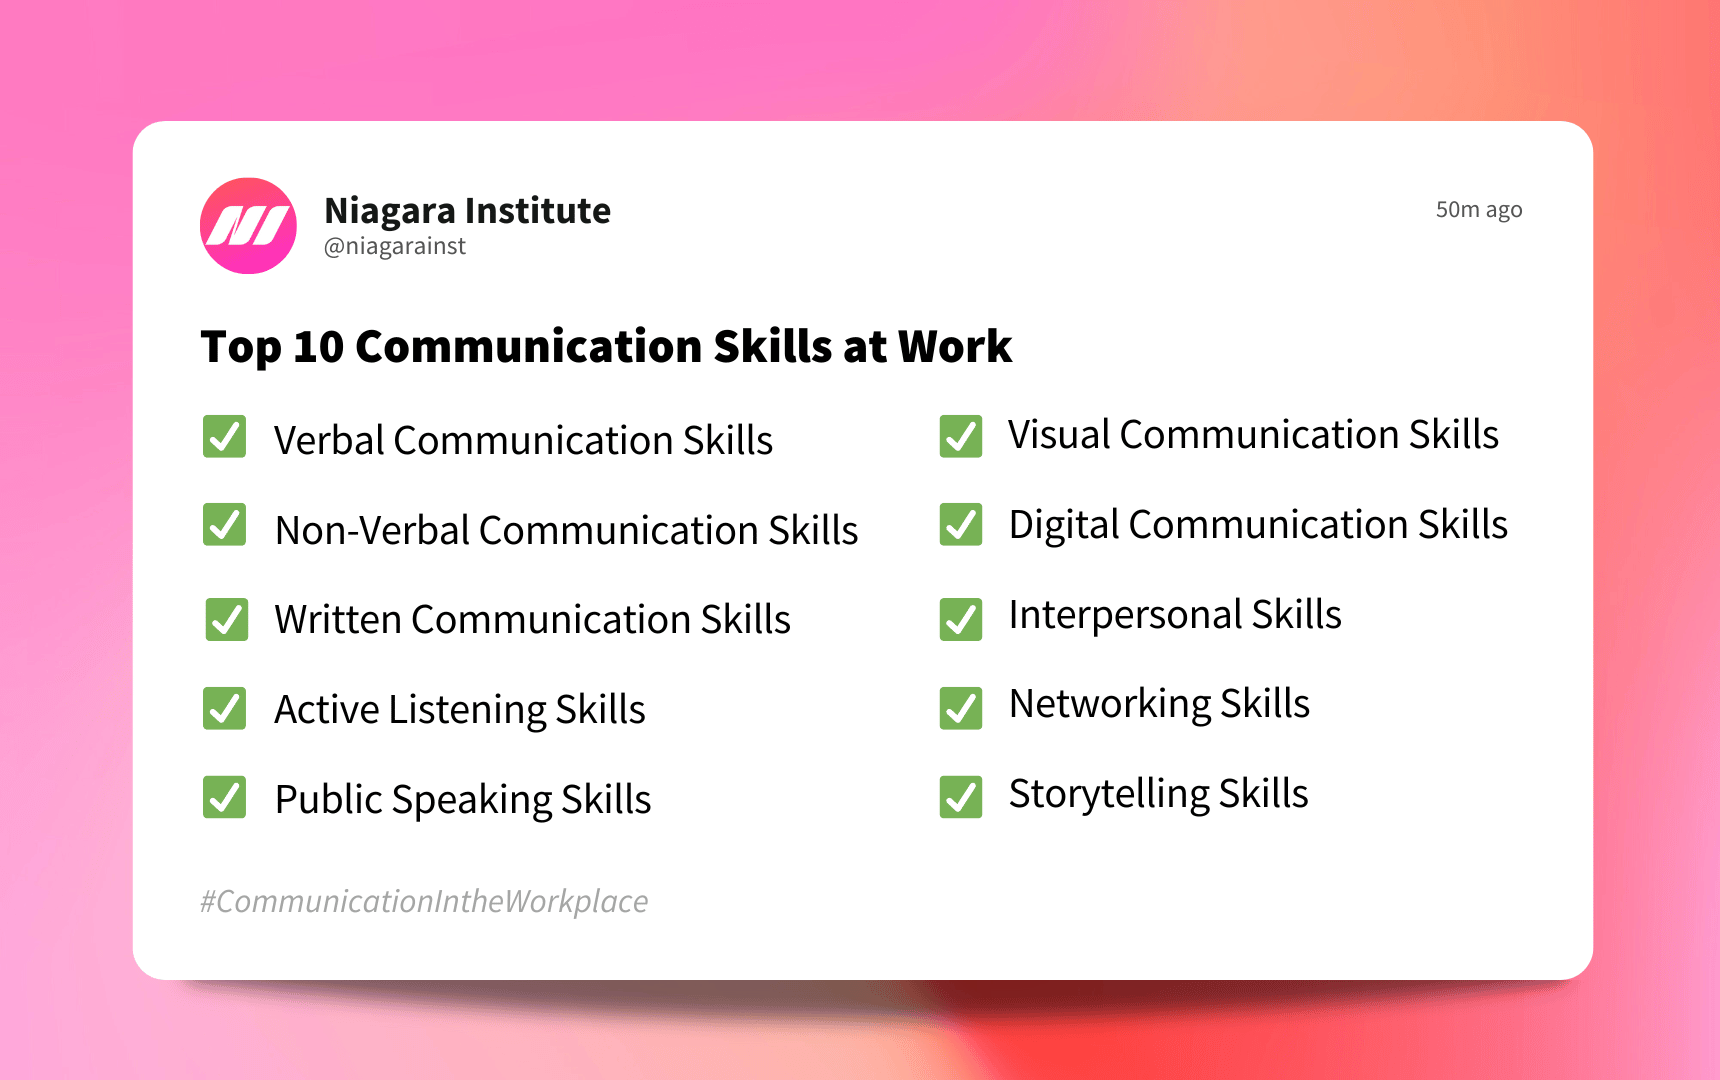 Top 10 Communication Skills in the Workplace